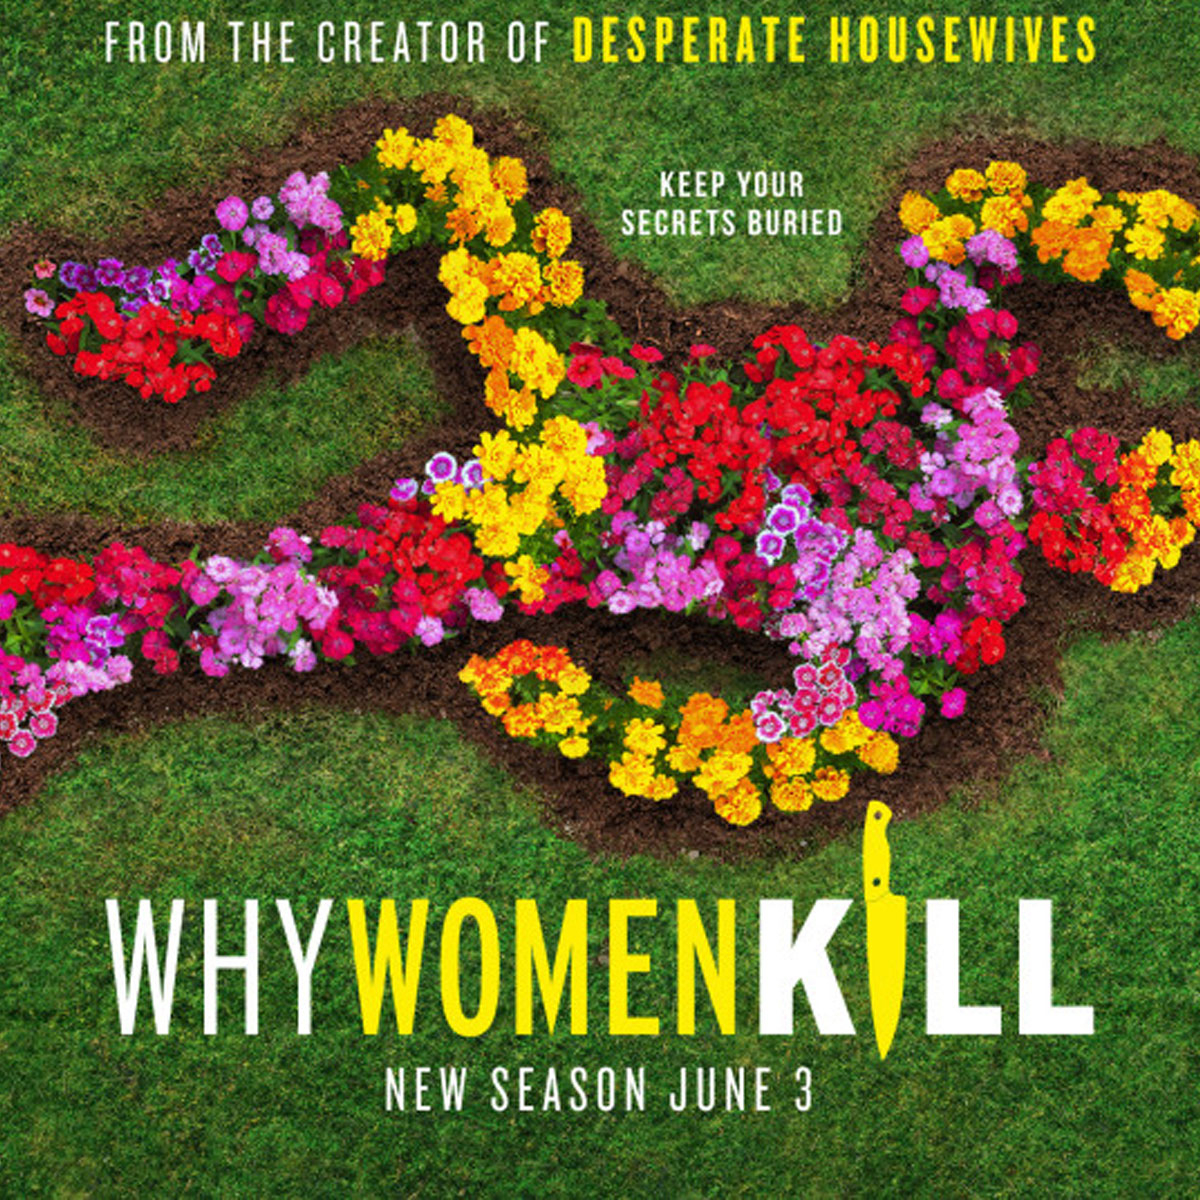 https://akns-images.eonline.com/eol_images/Entire_Site/2021327/rs_1200x1200-210427123643-1200-why-women-kill-season-2-key-art.jpg?fit=around%7C1080:1080&output-quality=90&crop=1080:1080;center,top